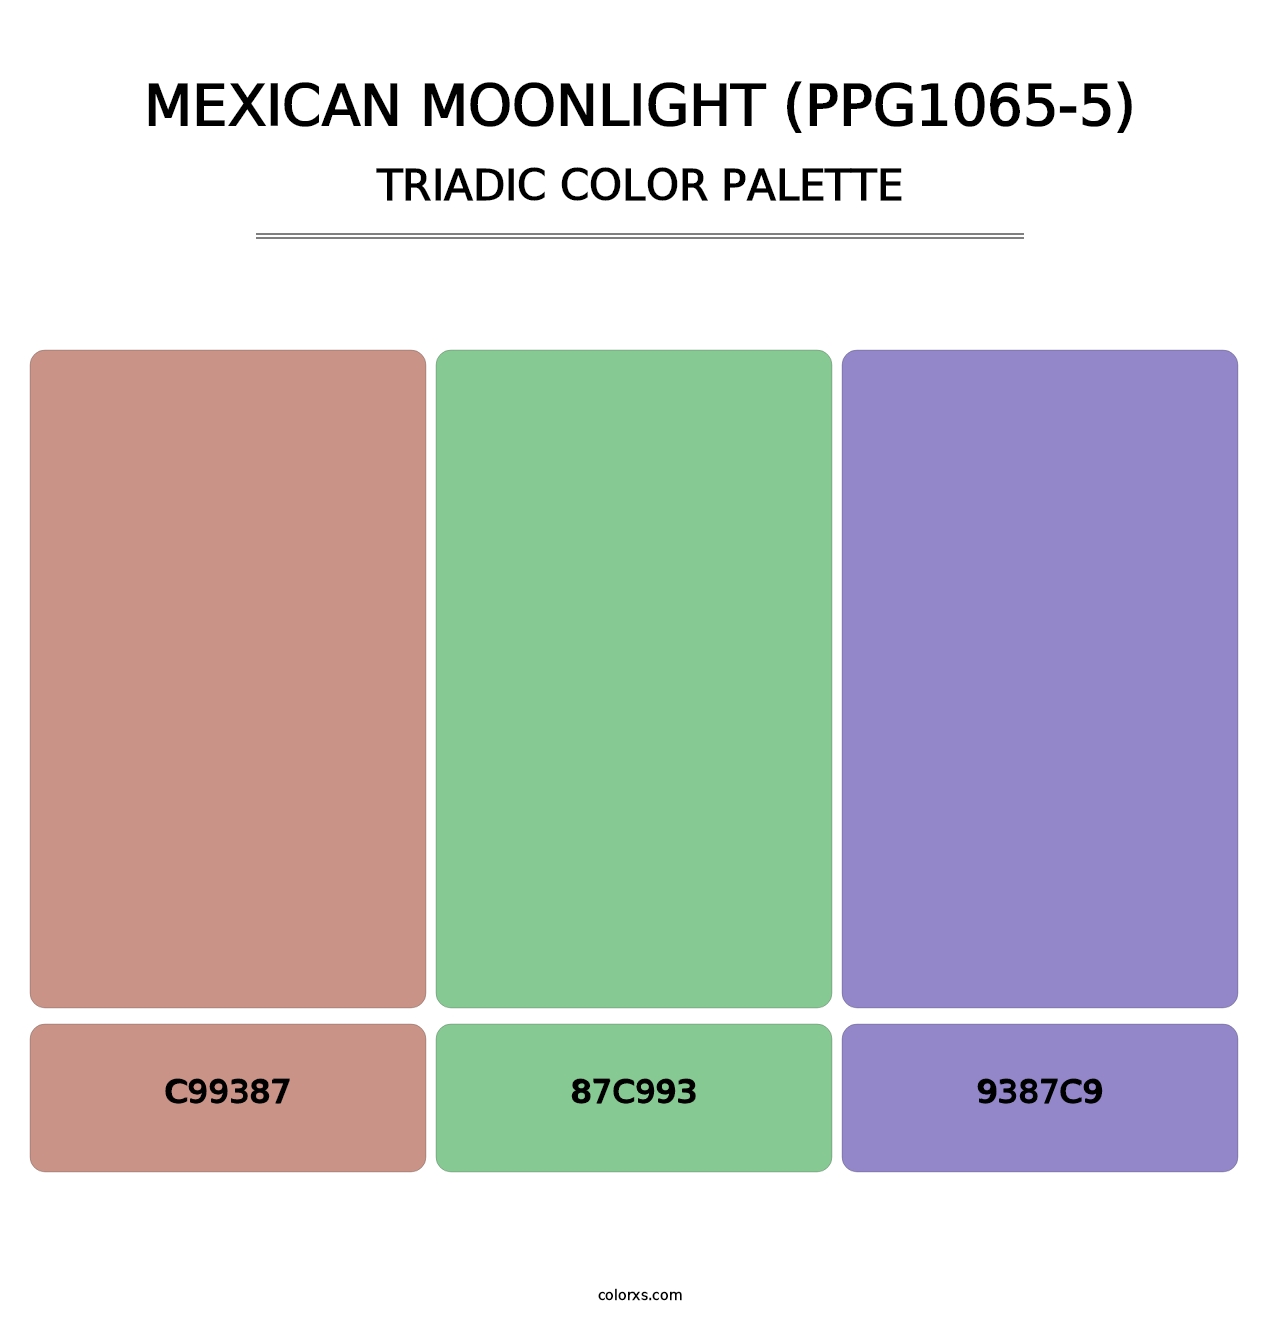 Mexican Moonlight (PPG1065-5) - Triadic Color Palette